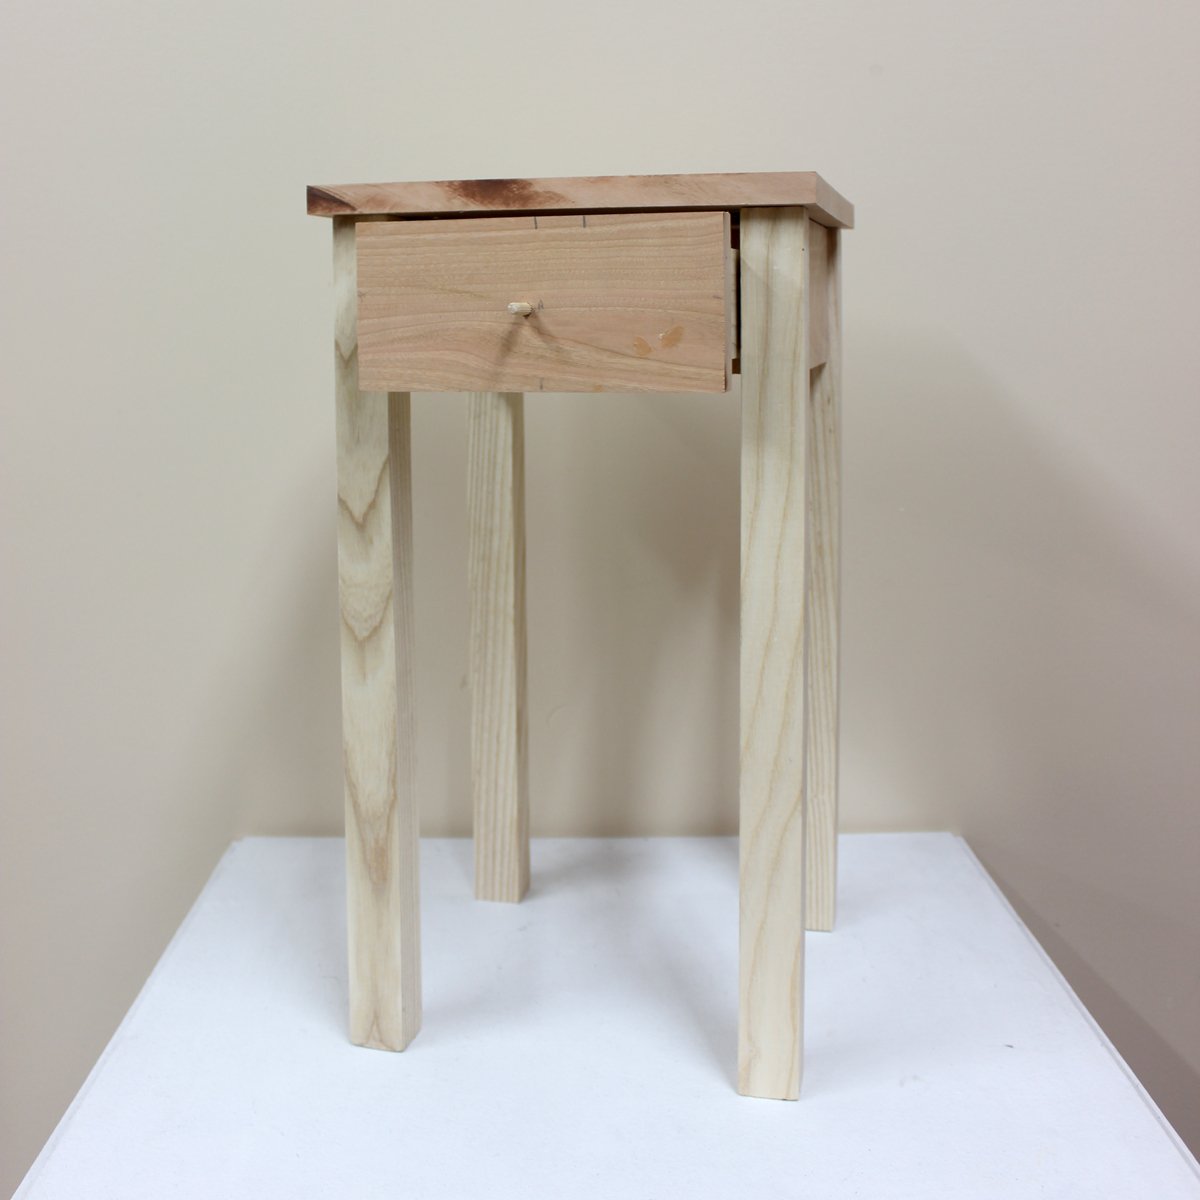  Youth Summer Camp: Made in  Woodworking  